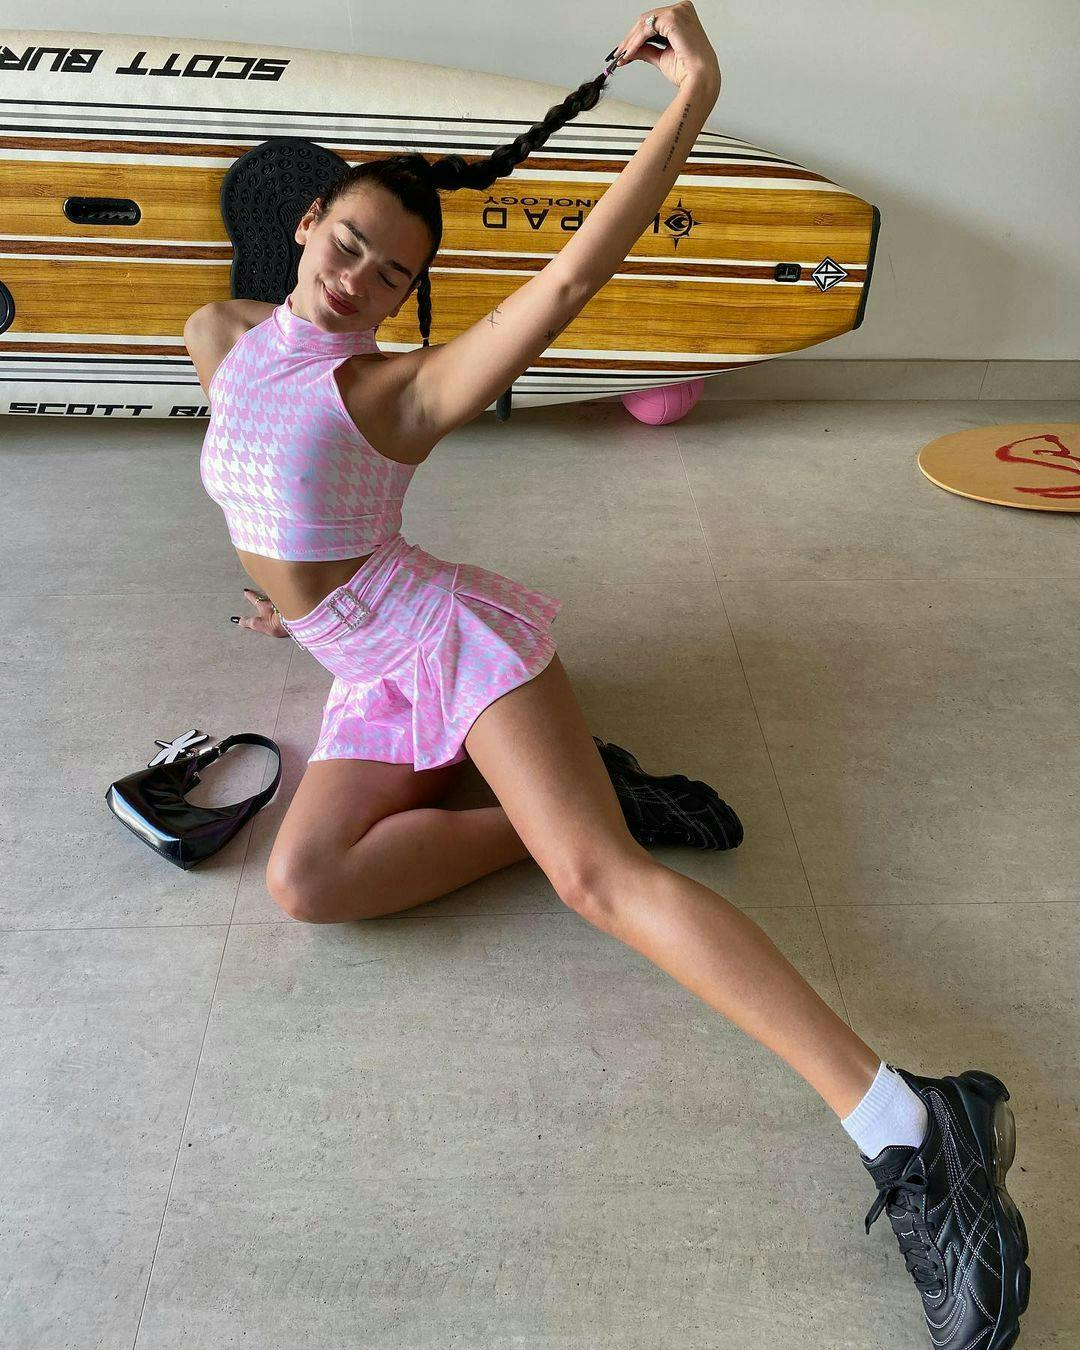 Dua Lipa poses in a matching hot pink houndstooth skirt and crop top, a preppy summer trend.